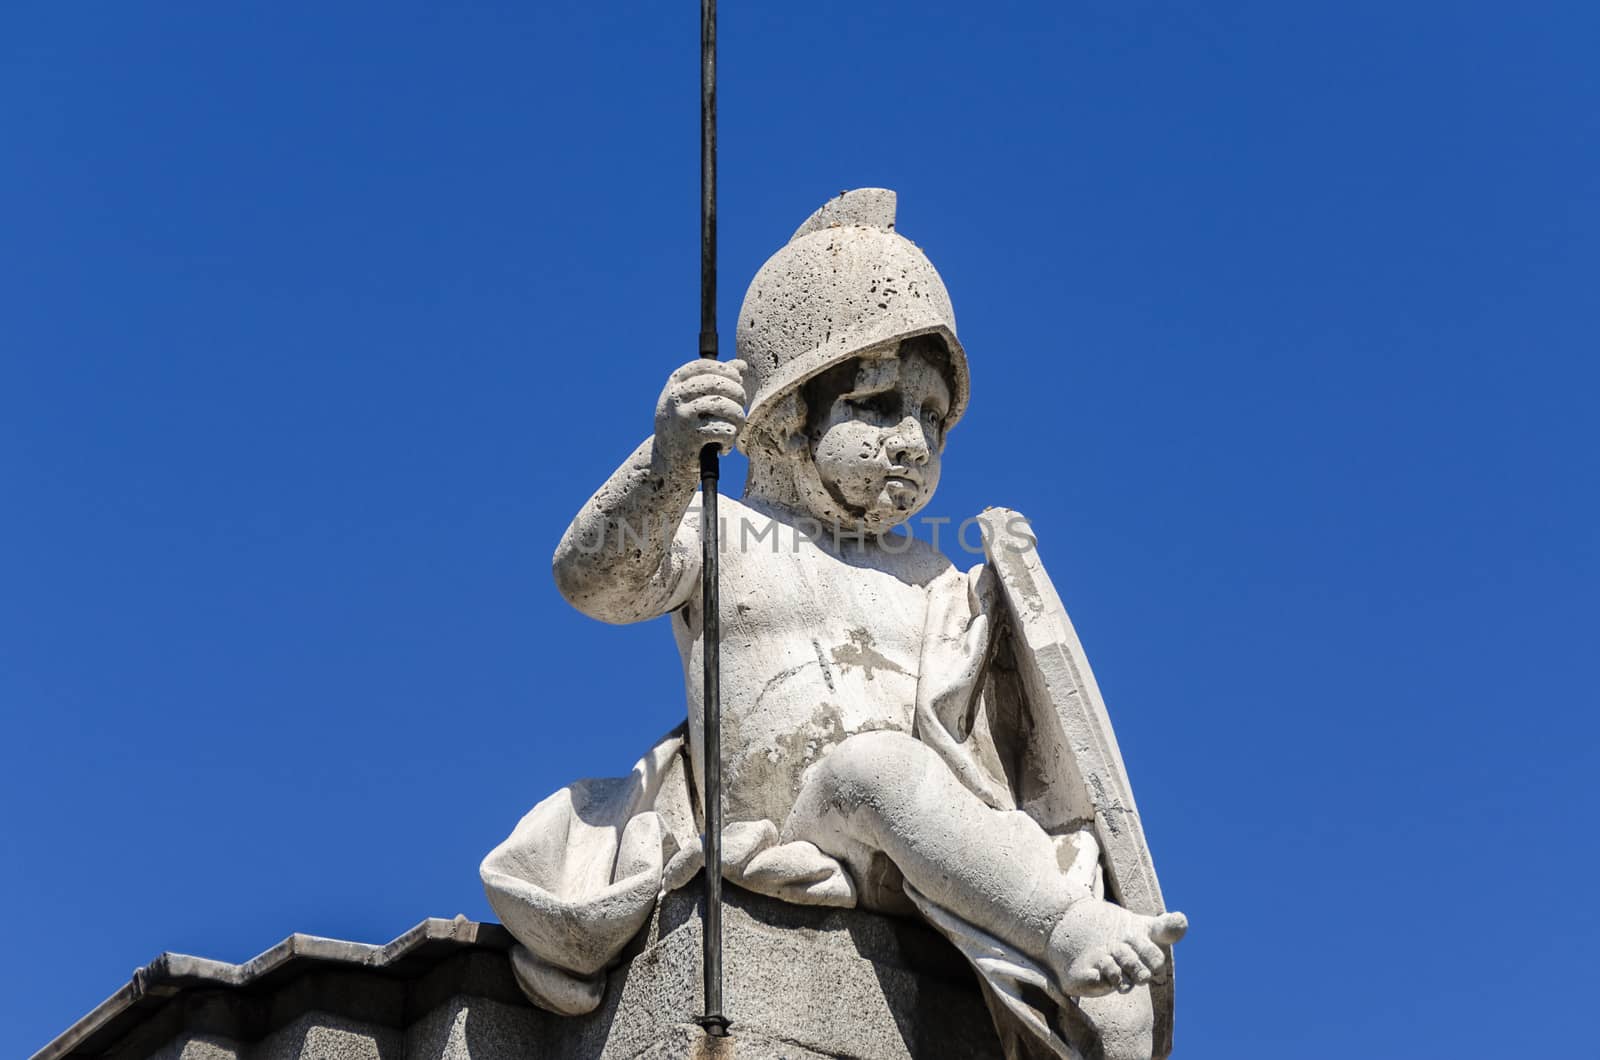 Statue of a boy on top of building in Spain